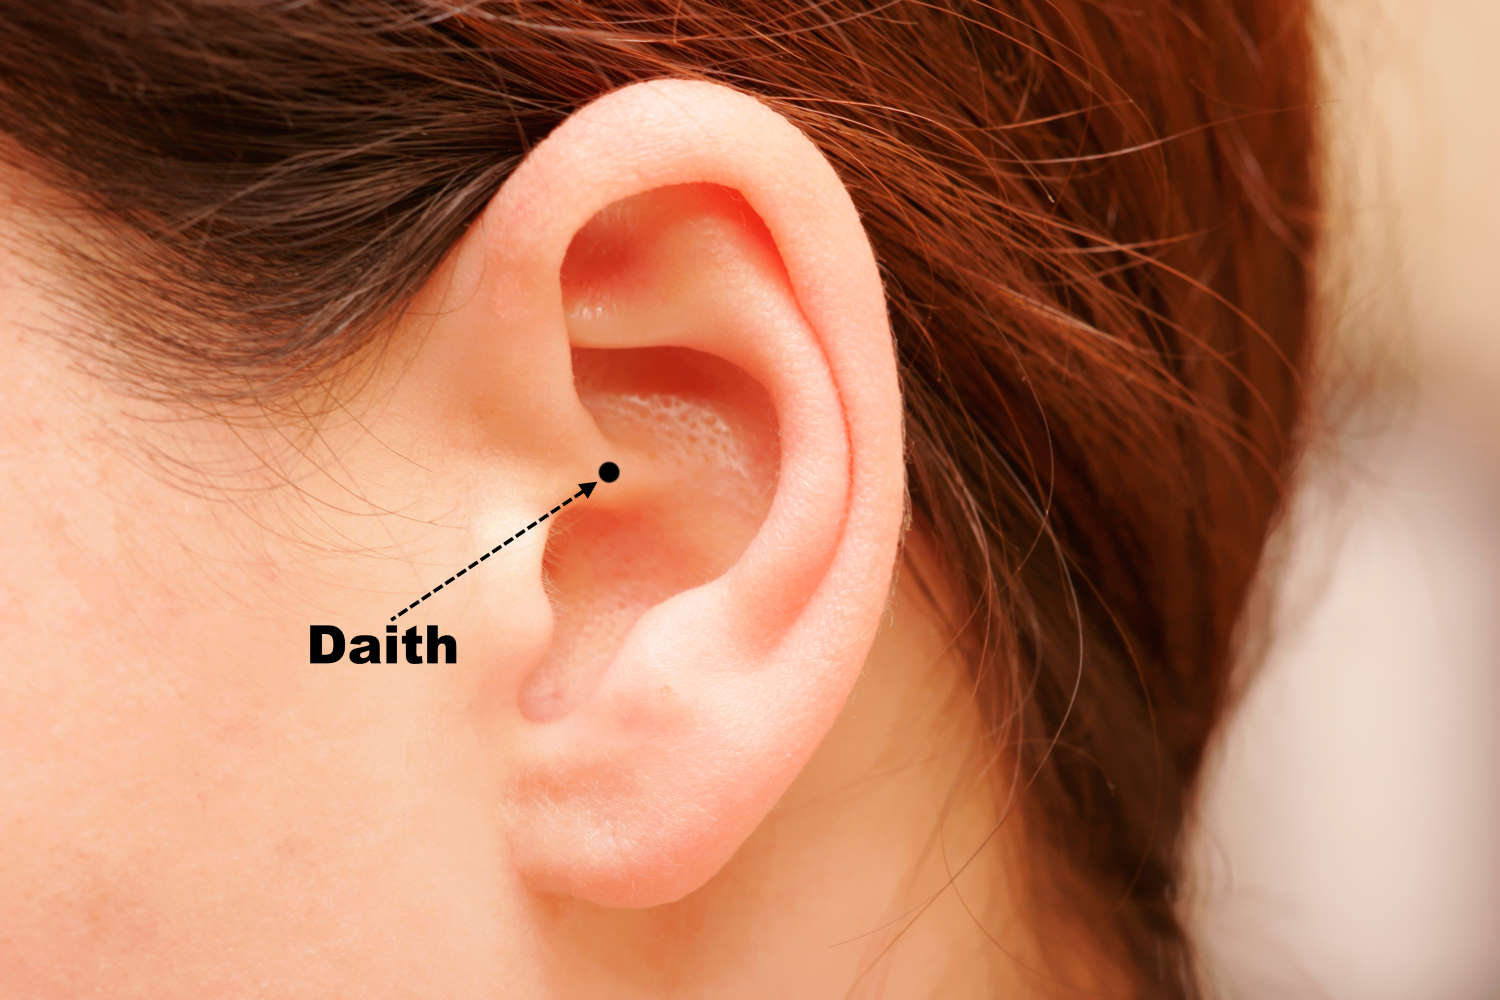 The location of the daith ear piercing shown on a female models ear.